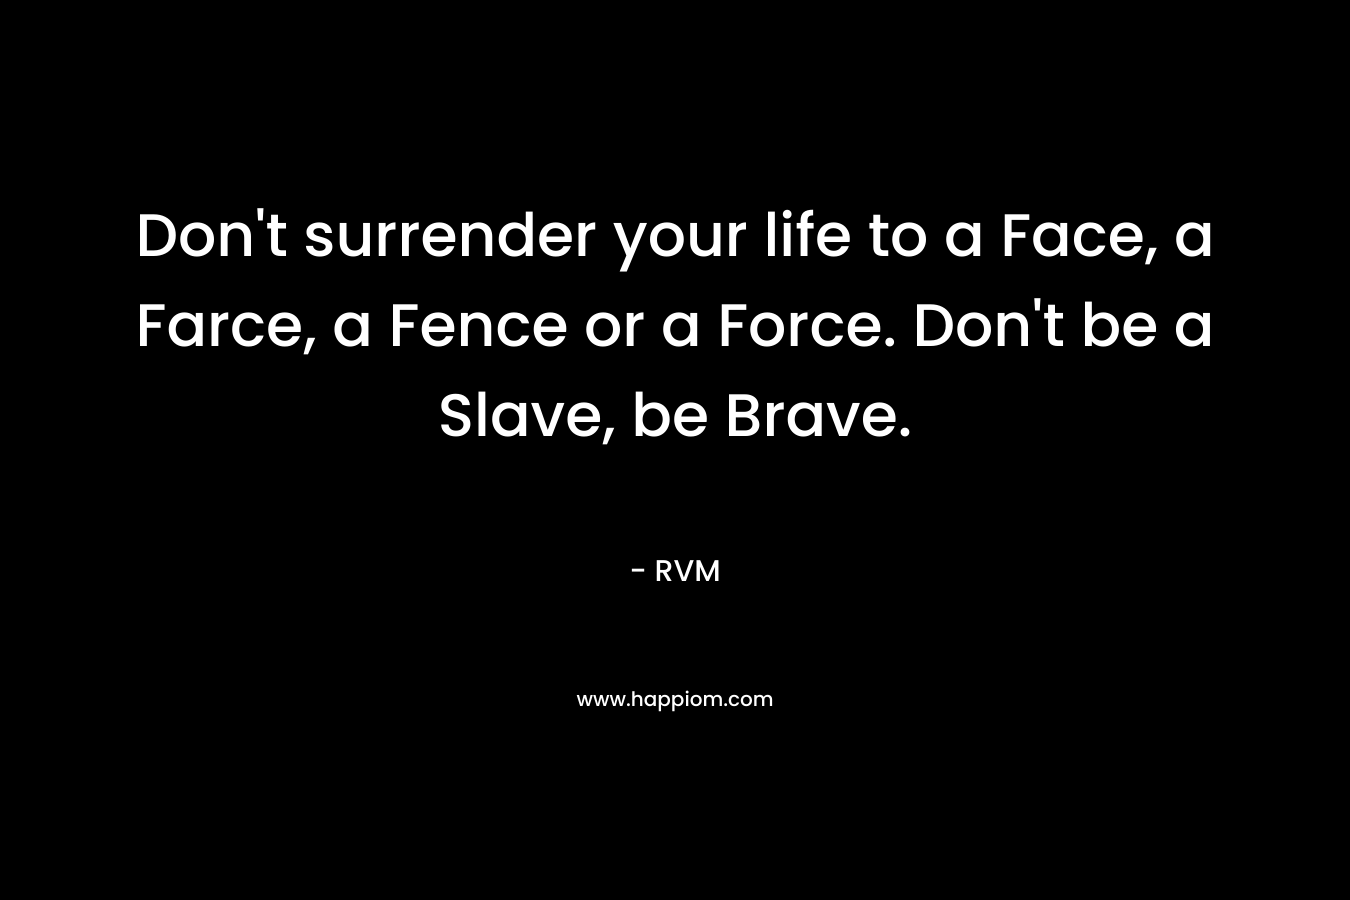 Don't surrender your life to a Face, a Farce, a Fence or a Force. Don't be a Slave, be Brave.